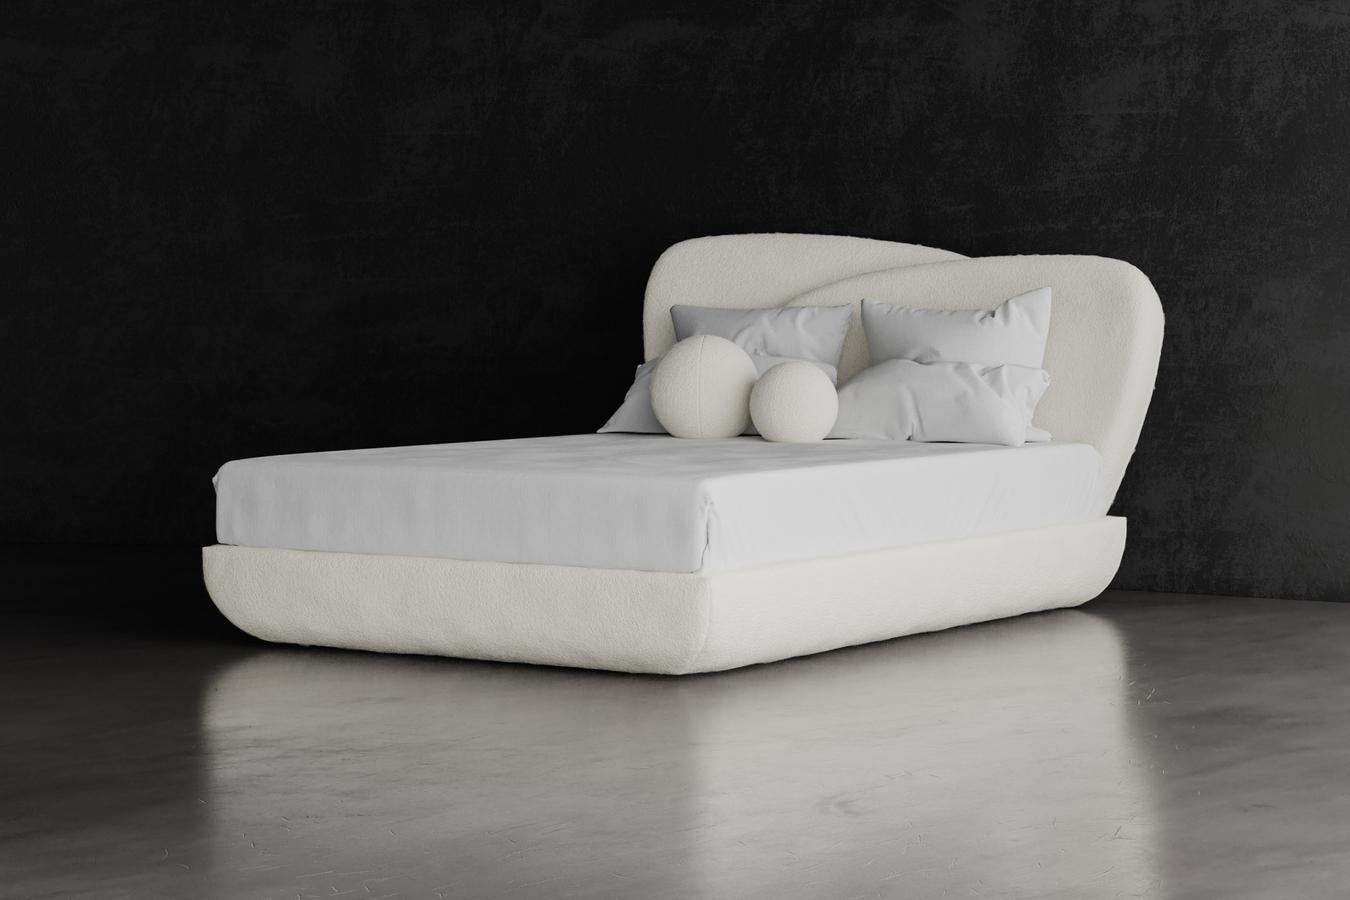 The Curve Bed features layered asymmetrical design elements that are both sophisticated and simple. The unbalanced tension works beautifully together to make a minimal and elegant design statement. The displayed fabric is our warm and inviting cream